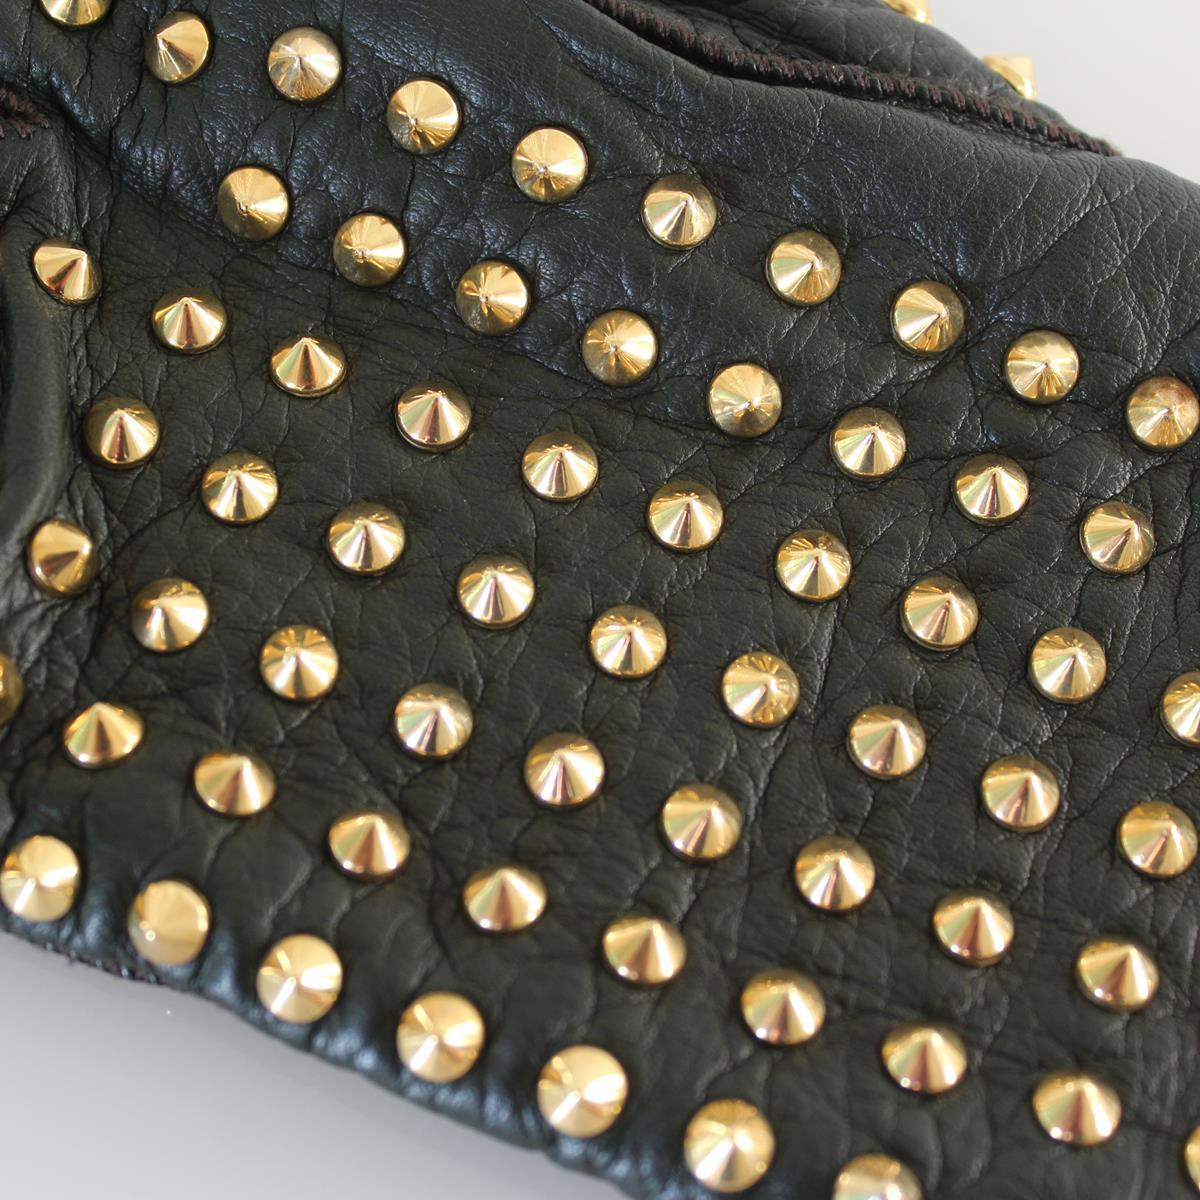 Super chic Burberry gloves
Supersoft leather
Dark green color
Golden studs
Size 8 / M
Original price € 680
Worldwide express shipping included in the price !